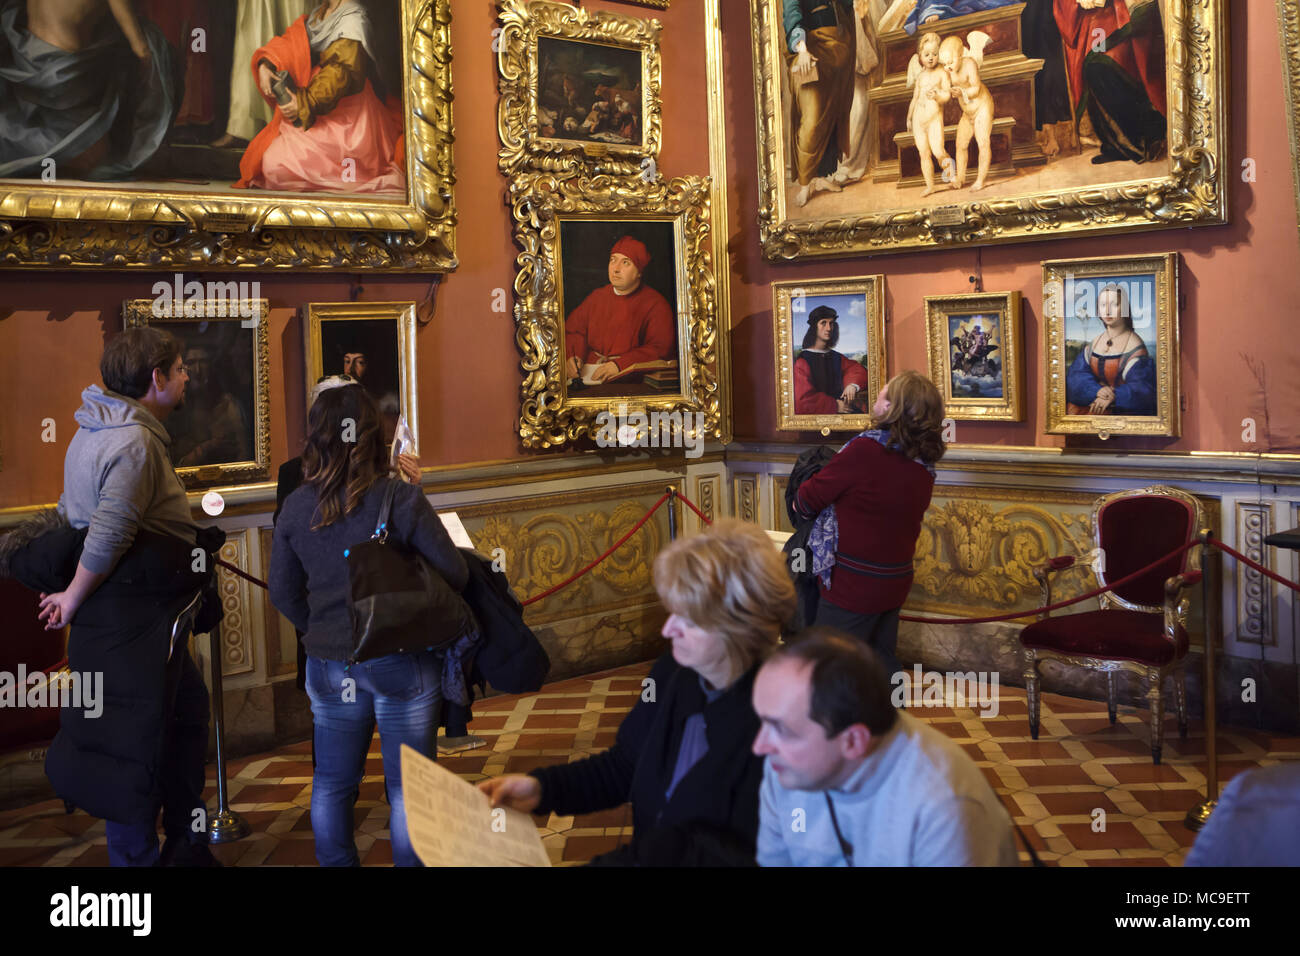 Visitors in front of the paintings by Italian Renaissance painter Raphael in the Palatine Gallery (Galleria Palatina) in the Palazzo Pitti in Florence, Tuscany, Italy. Stock Photo